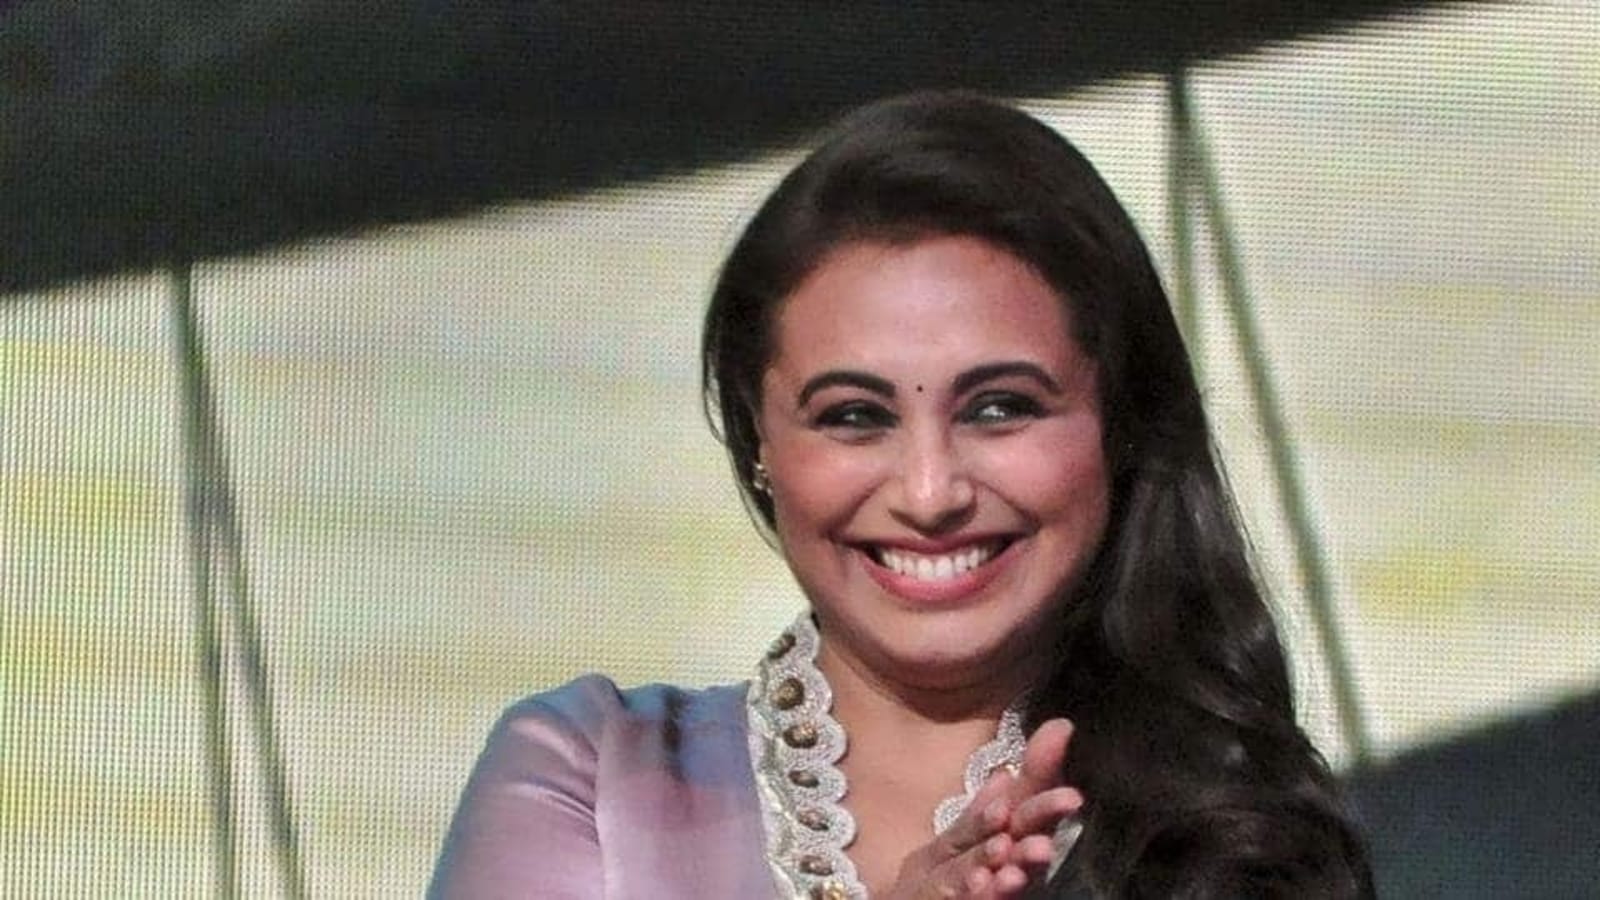 Rani Mukherjee Xxxx Vidos - When Rani Mukerji got exchanged with another baby at hospital after birth |  Bollywood - Hindustan Times